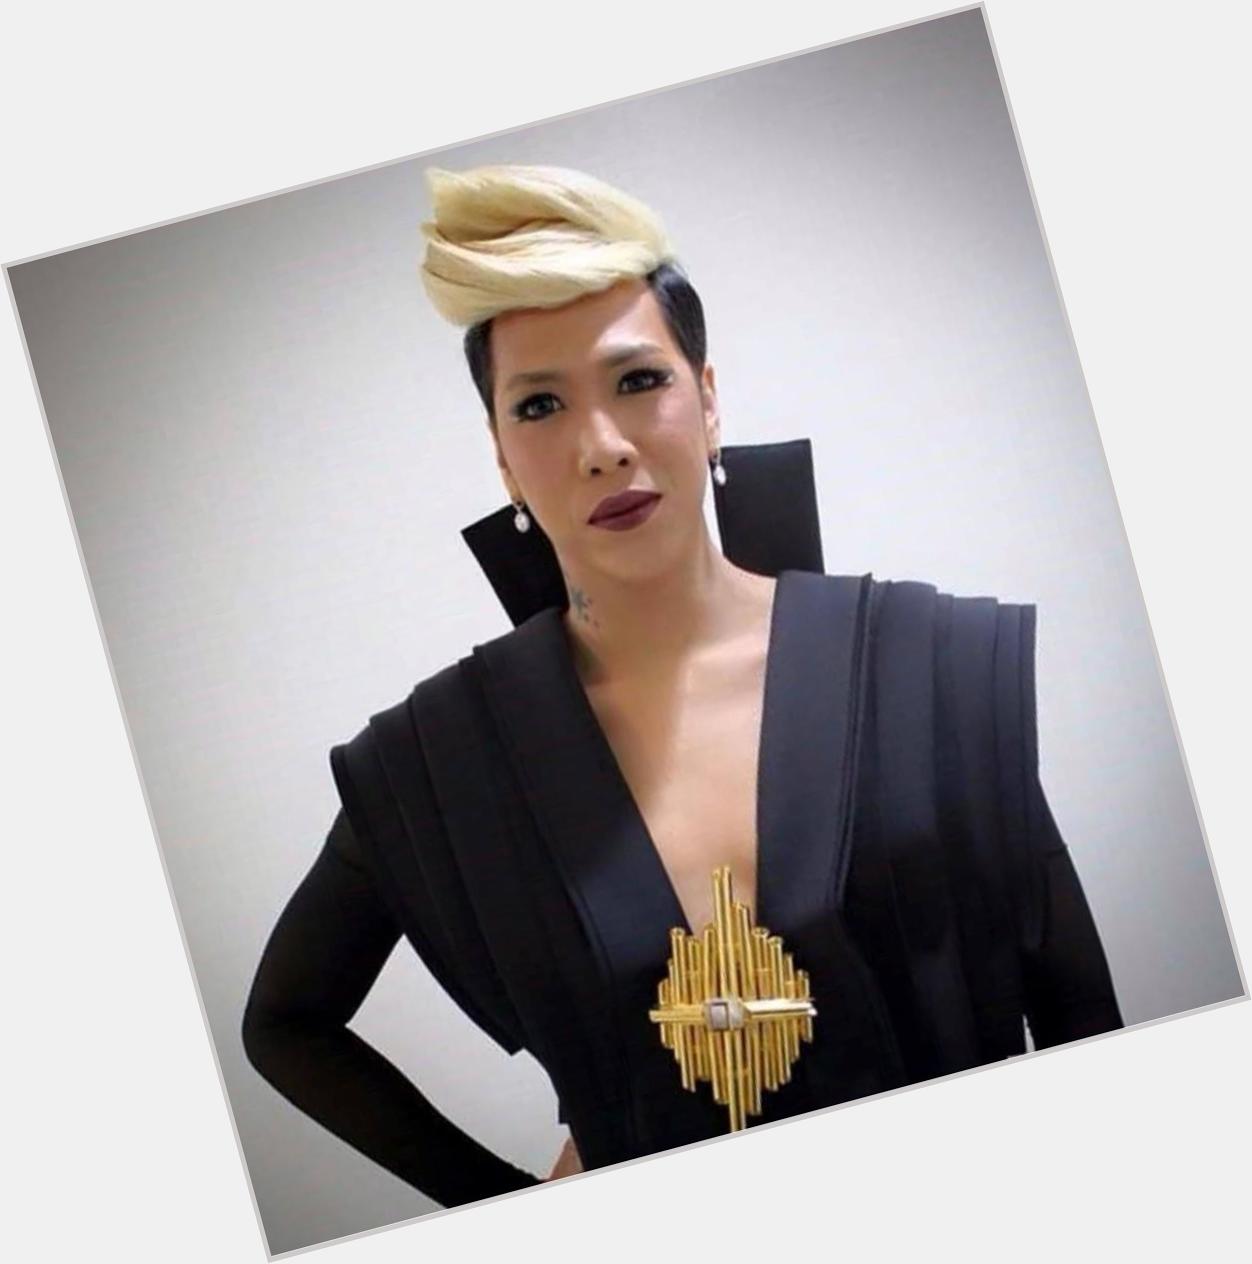 VG continues to be one fashionable and intelligent gay icon. Happy birthday, VICE GANDA! 